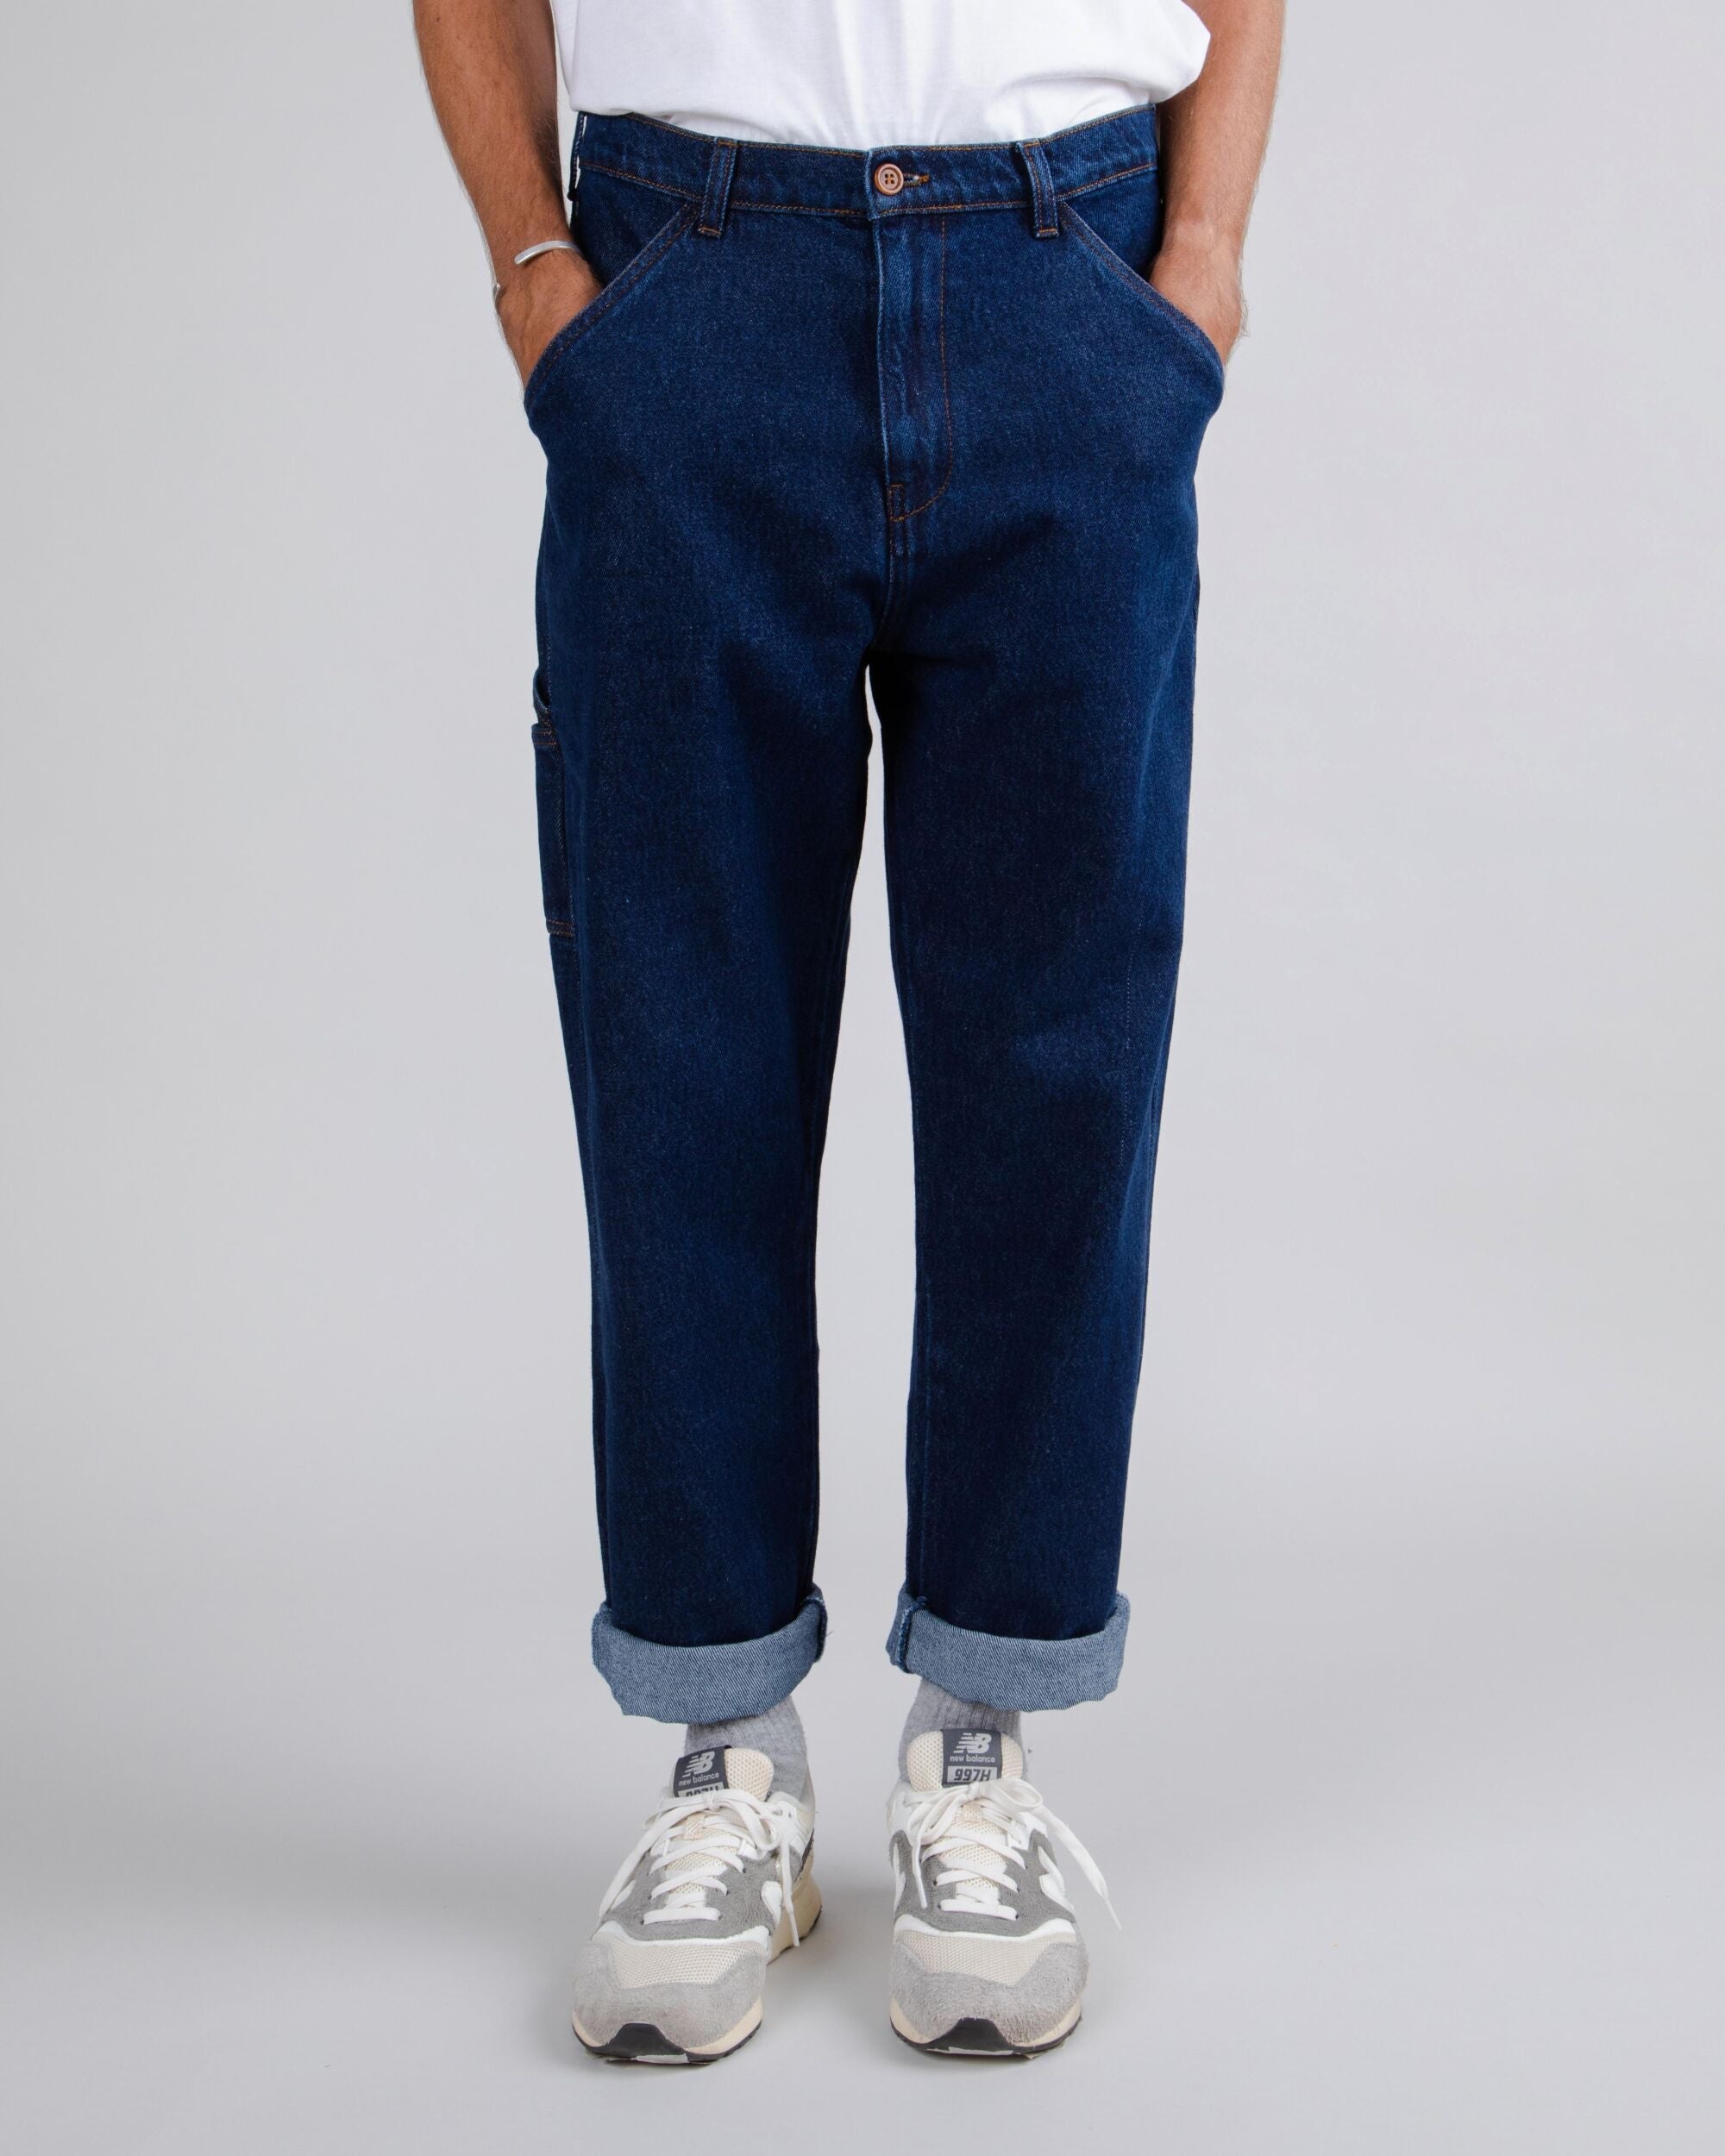 Blue workwear trousers made from organic cotton from Brava Fabrics